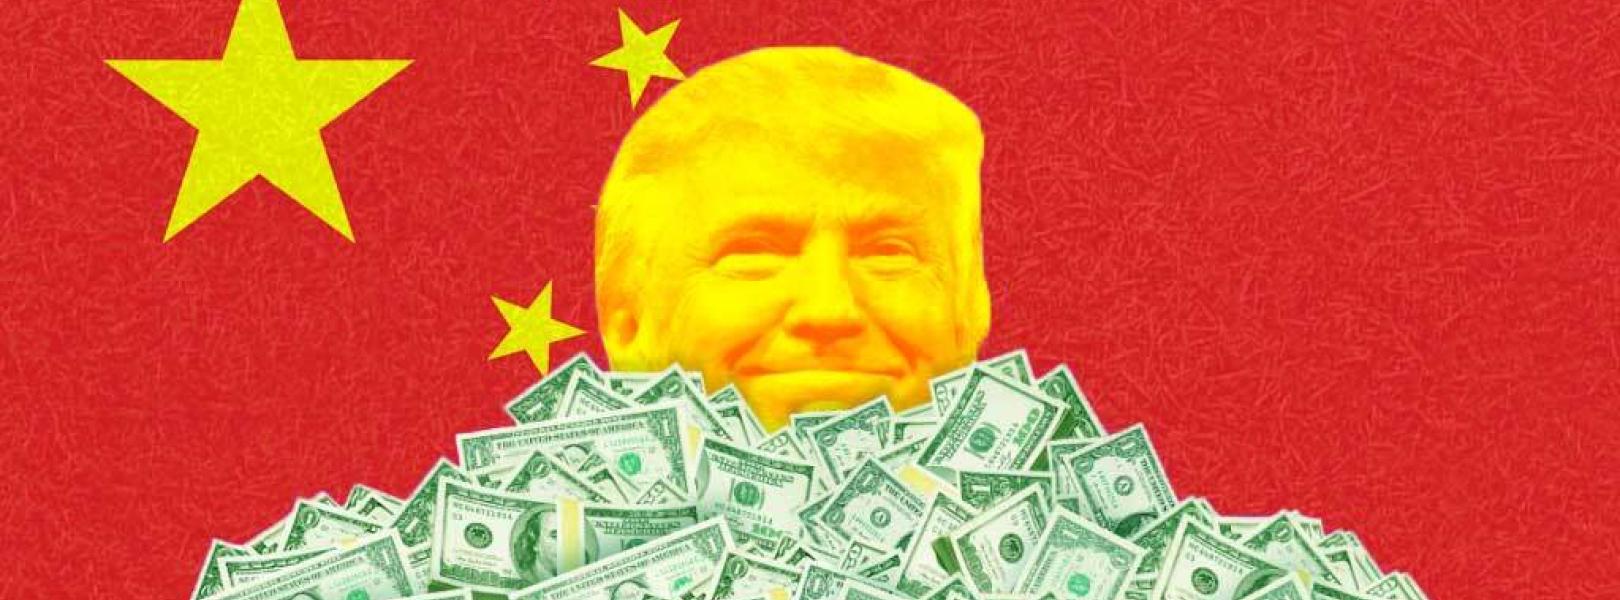 Trump in front of the Chinese flag surrounded by money 